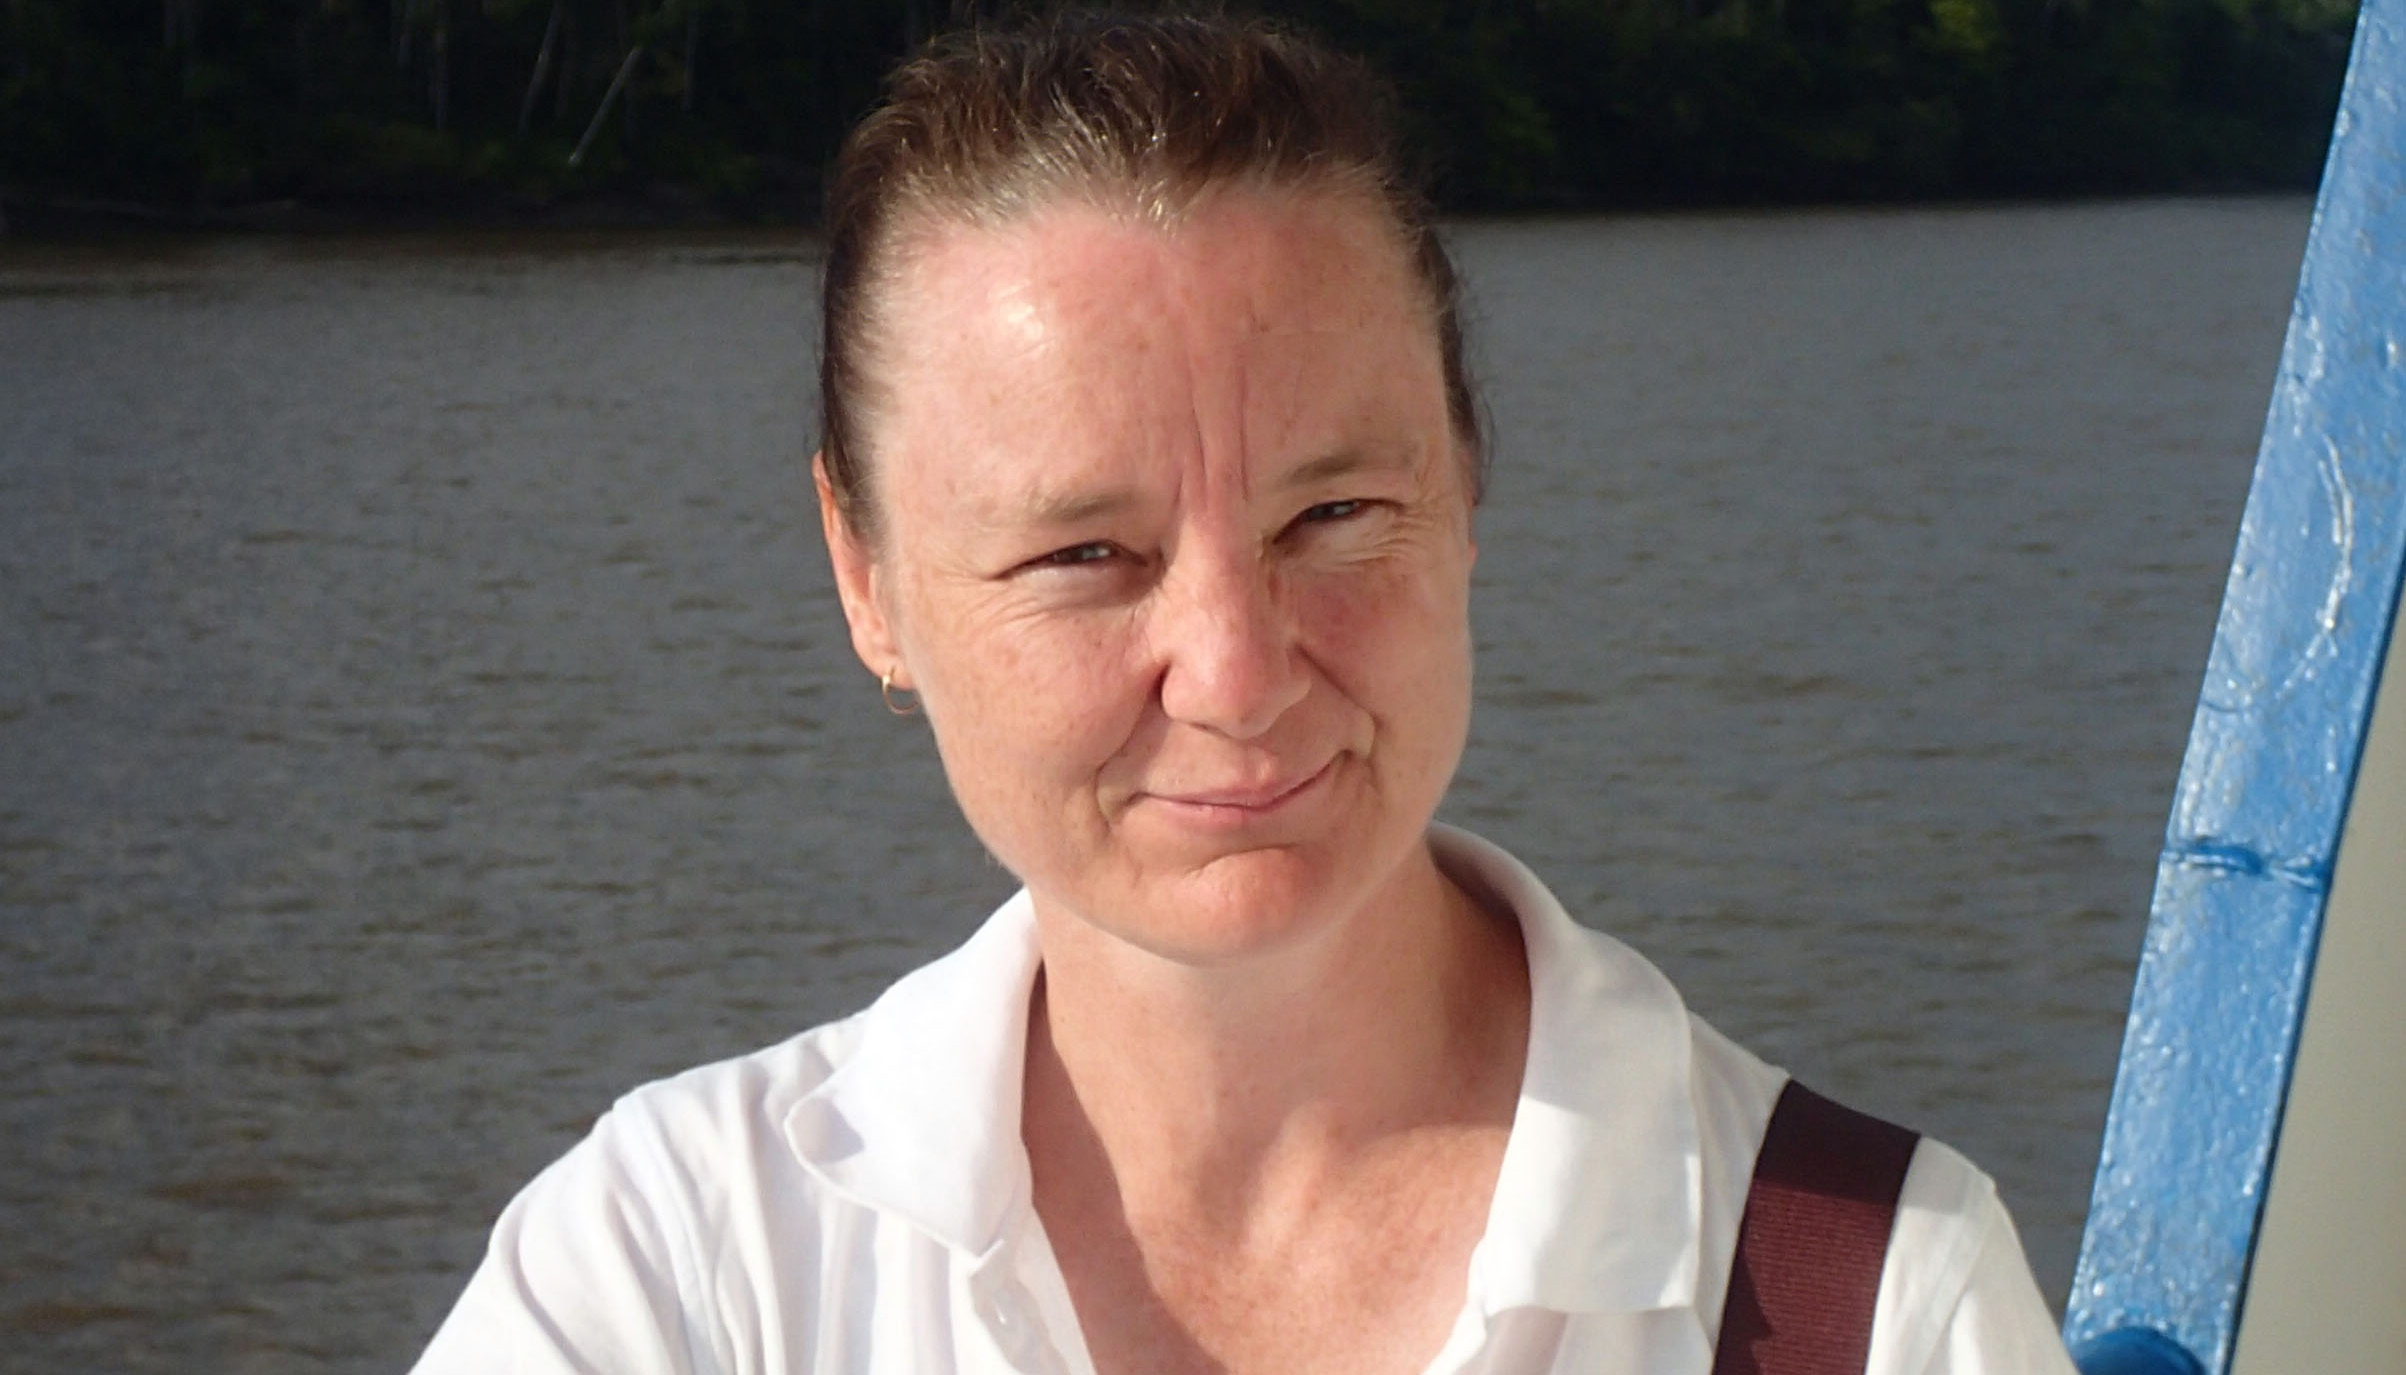 Professor Kirstie Fryirs of the School of Natural Sciences at Macquarie University